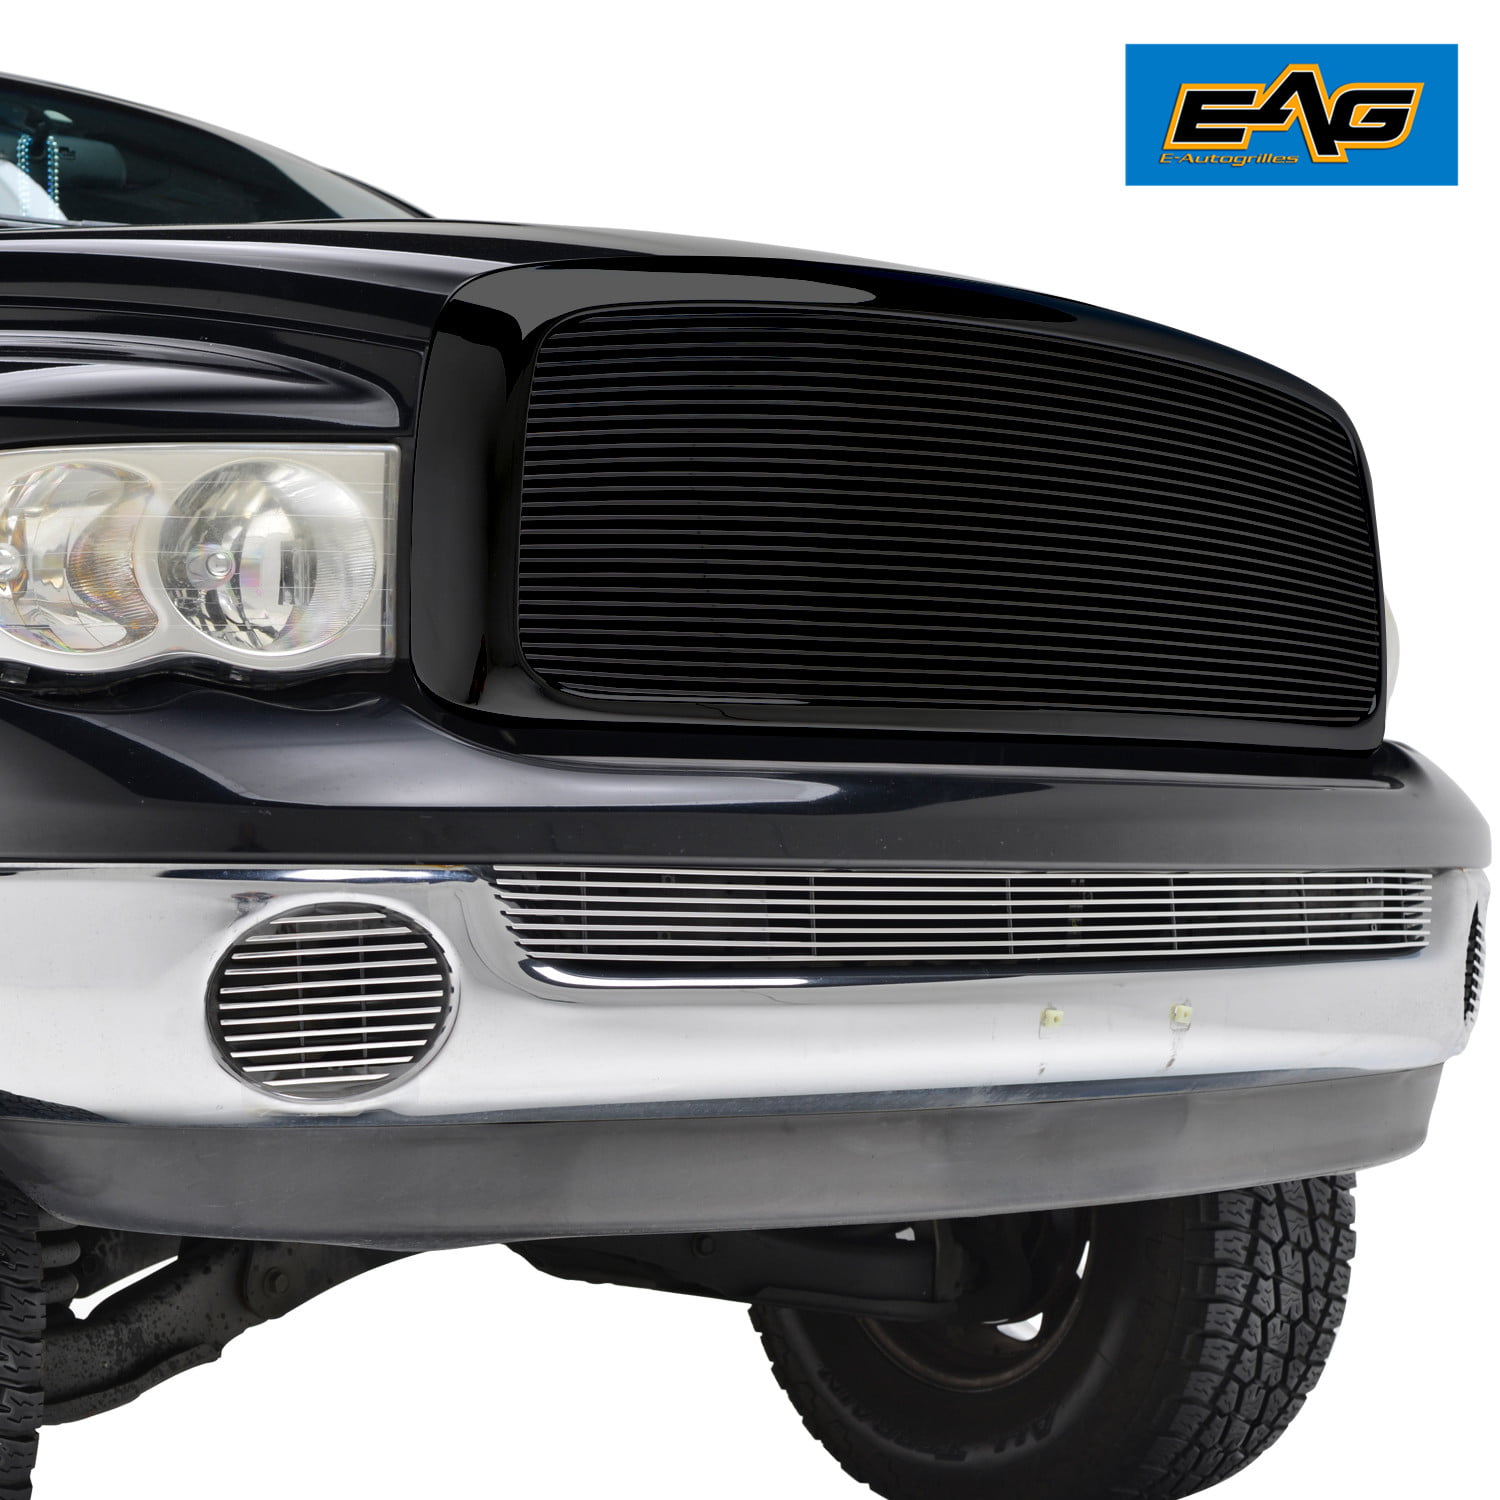 EAG Replacement Upper Grille Front Hood Mesh Grill Fit for 02-05 Dodge Ram 1500/03-05 Dodge Ram 2500 3500 Heavy Duty